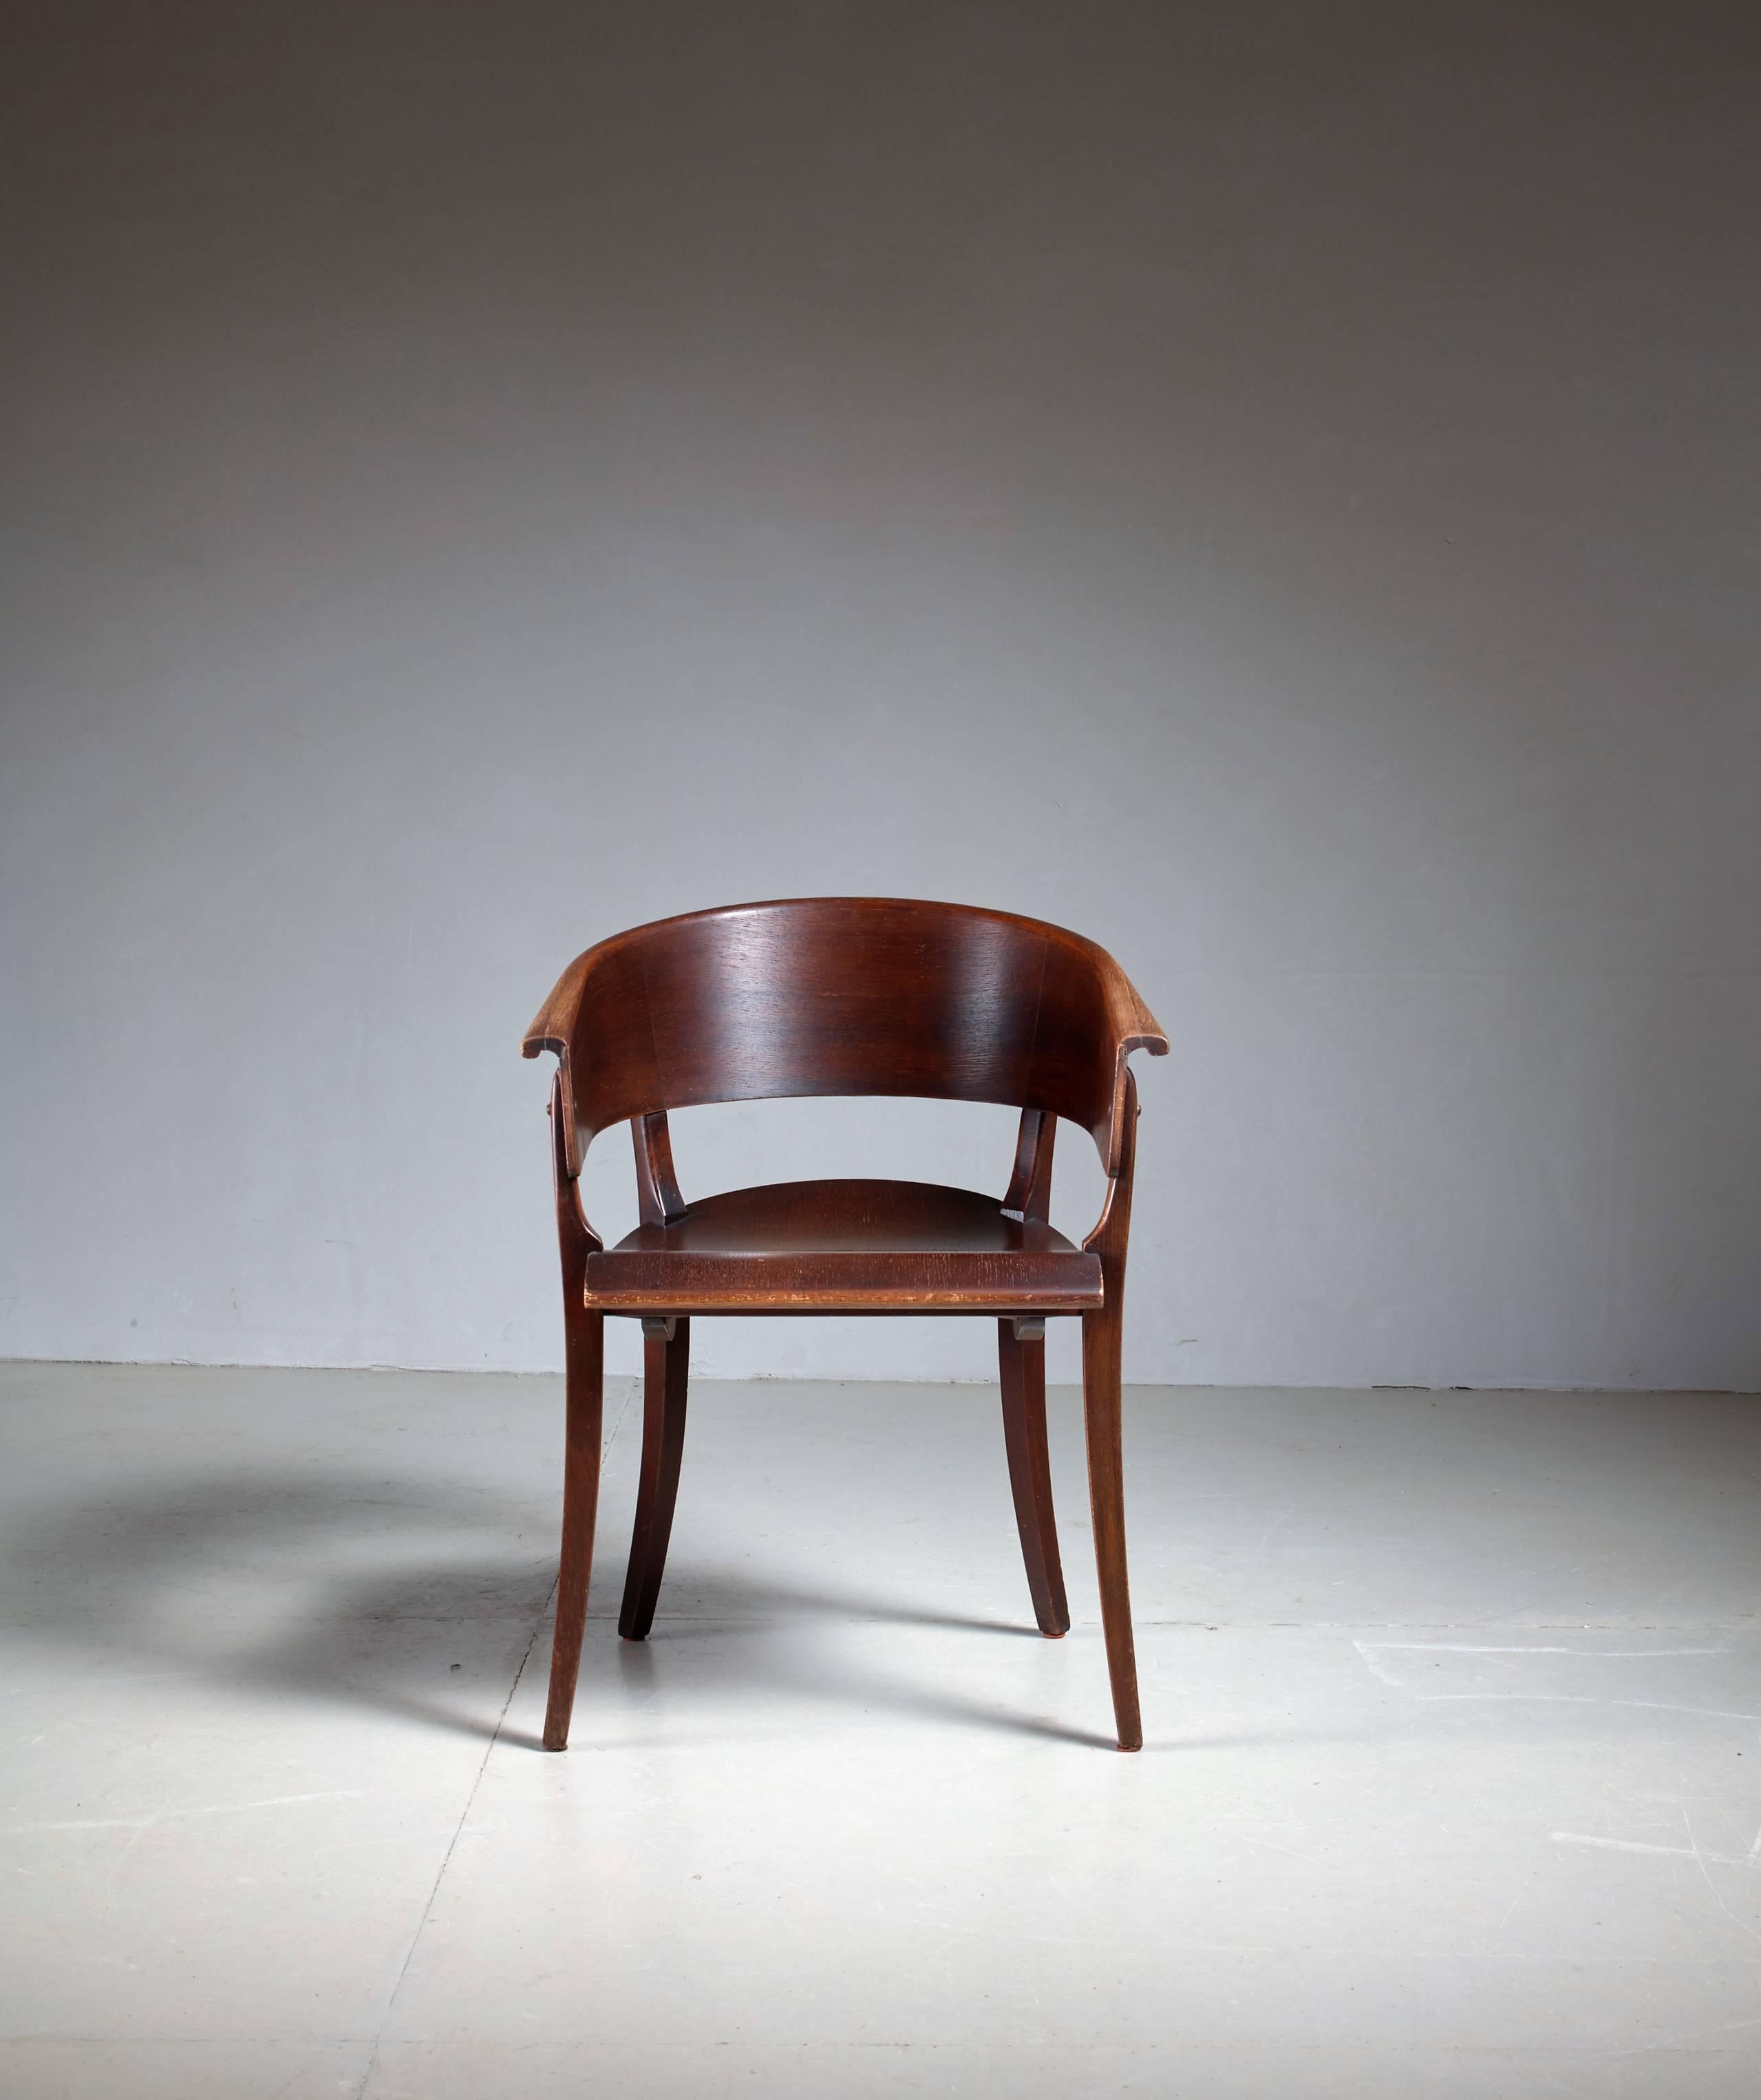 Beech Ernst Rockhausen Bauhaus Style Plywood and Oak Chair, Germany, circa 1928 For Sale